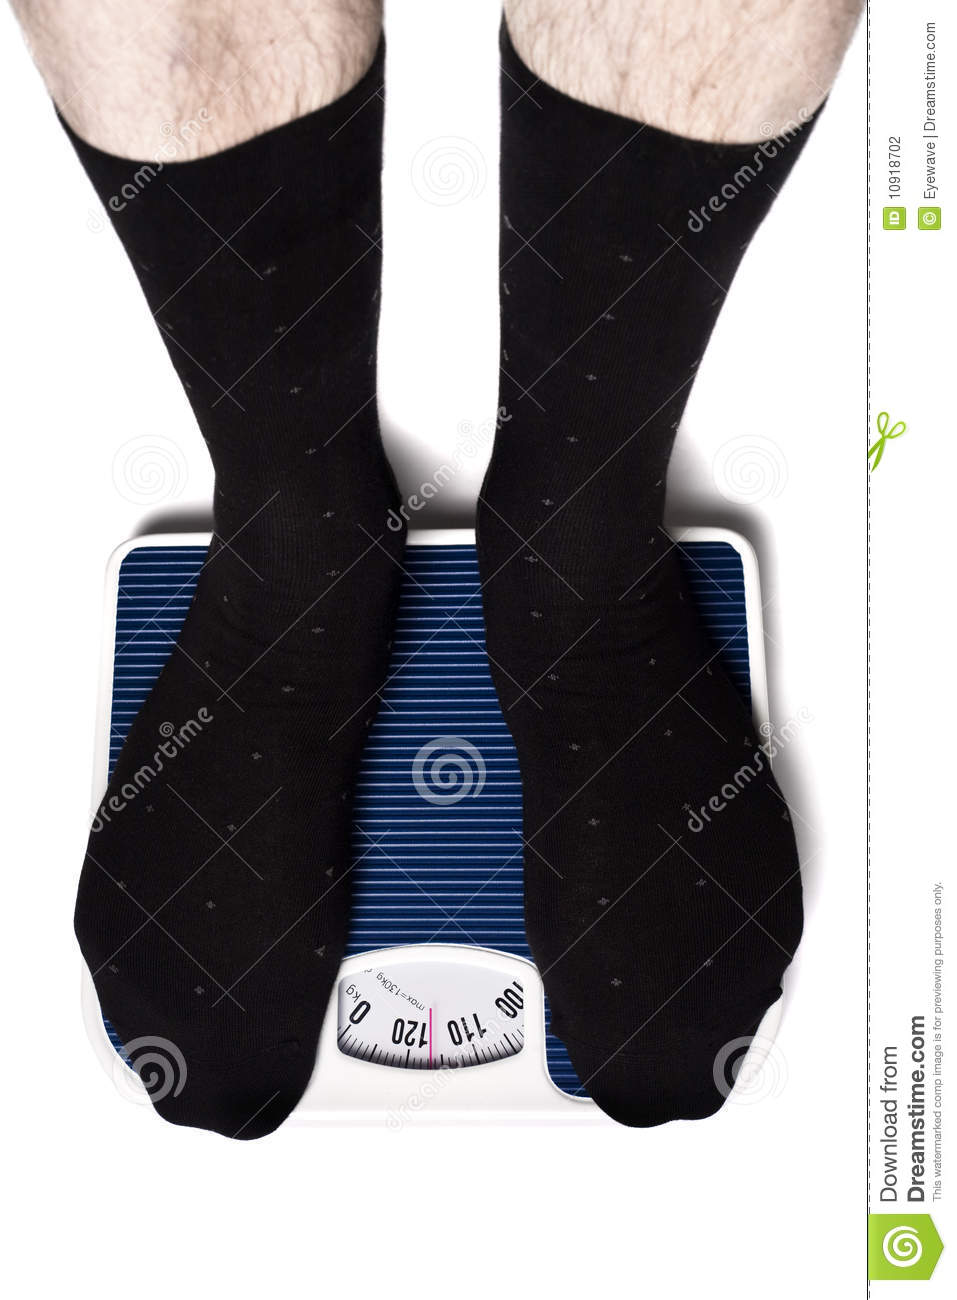 Feet In Socks On Bathroom Scales Stock Photography   Image  10918702